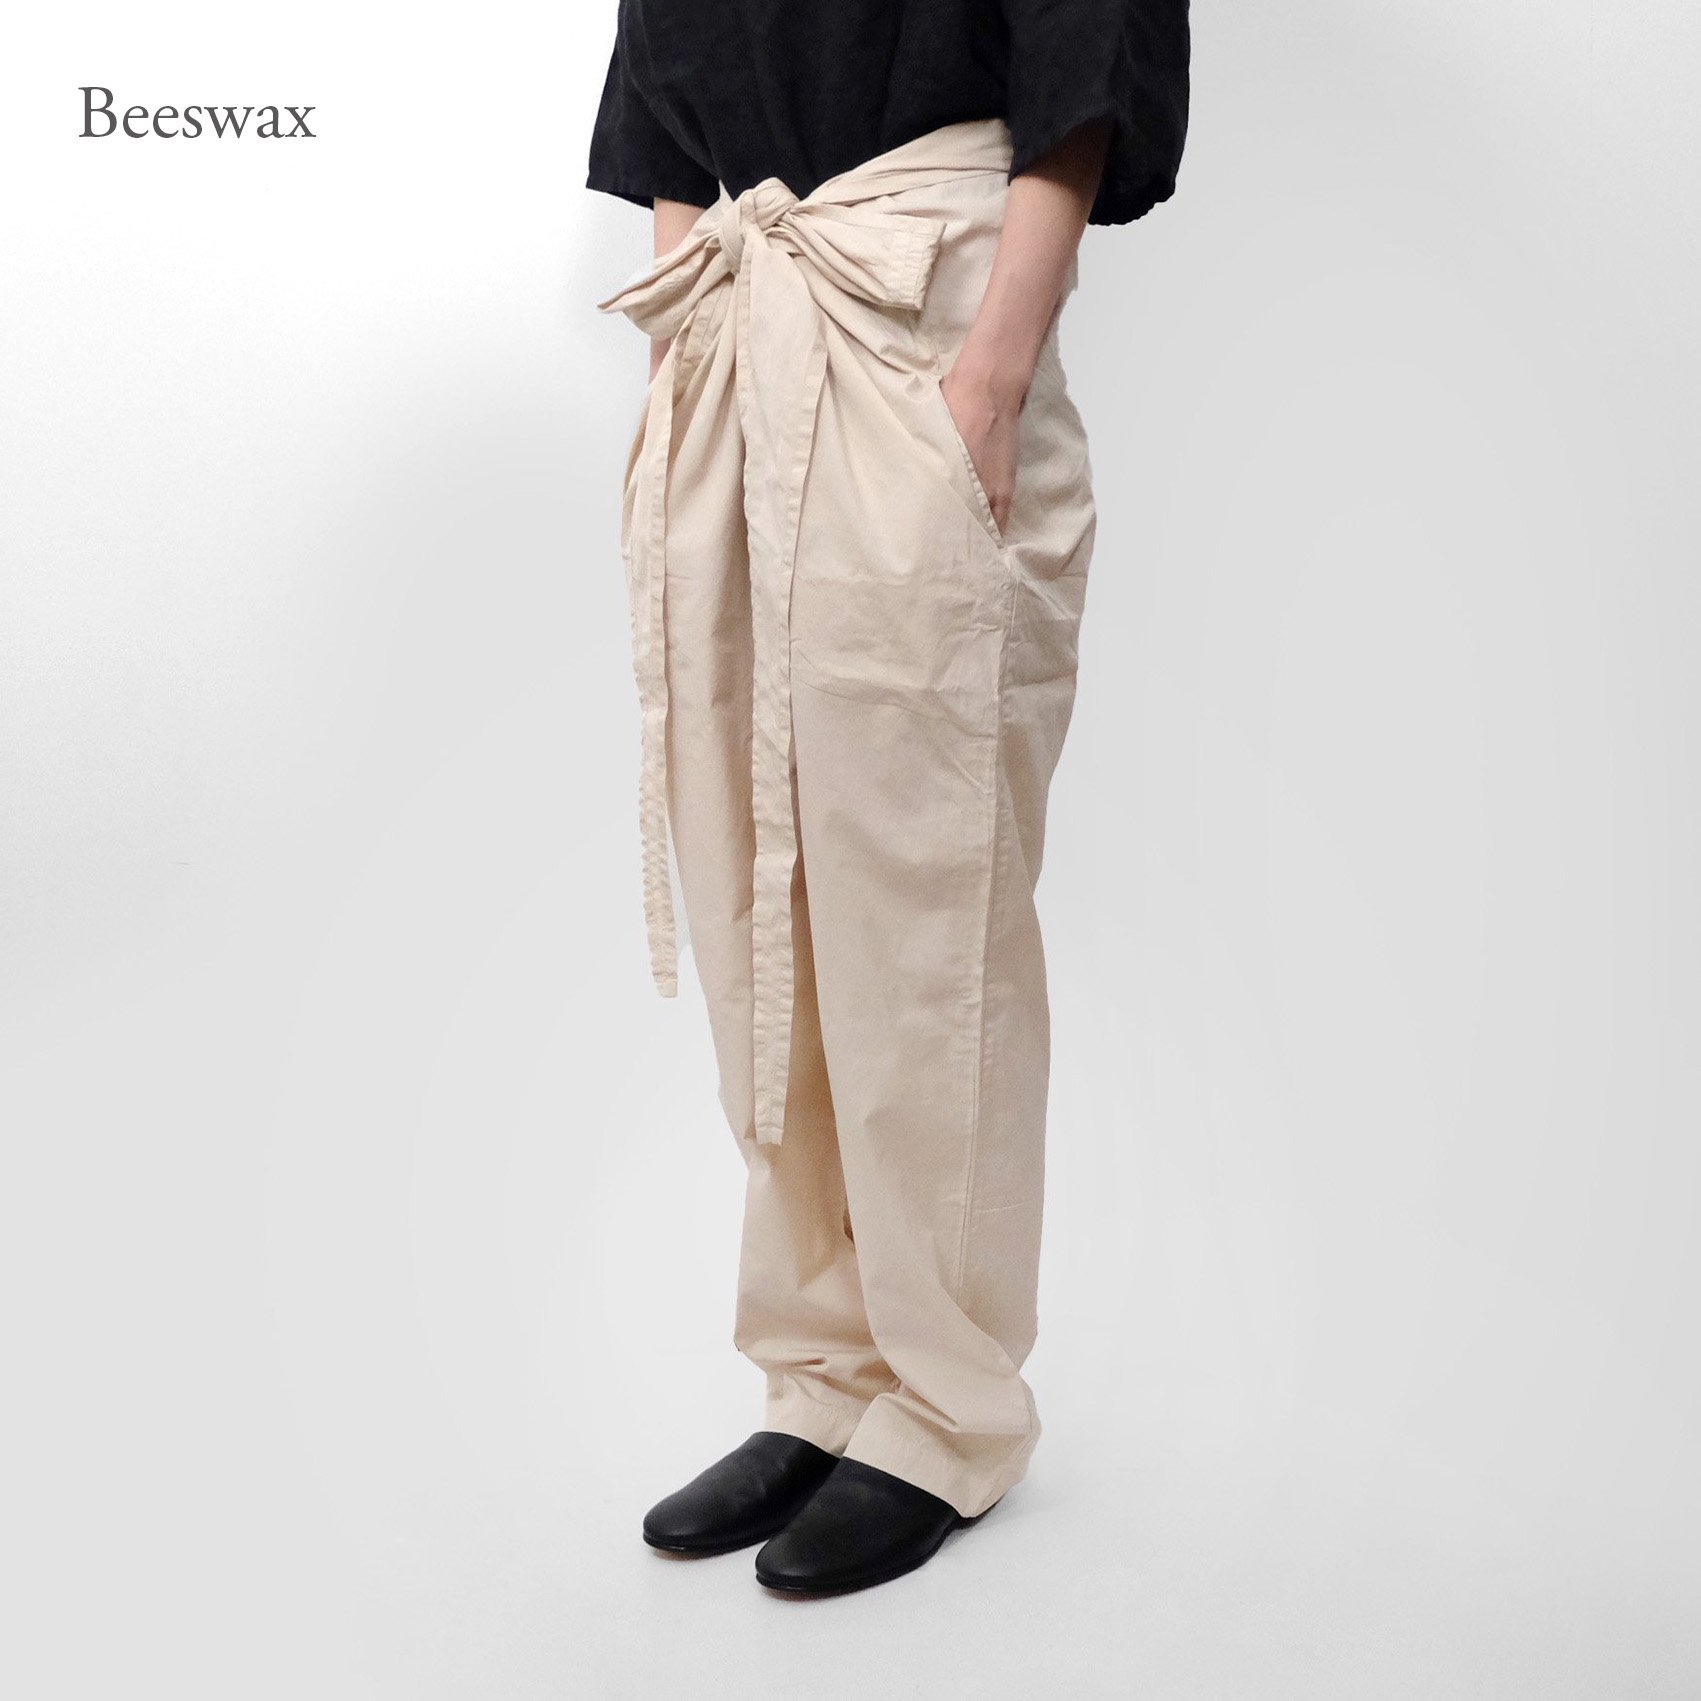 COSMIC WONDER / Suvin cotton wrapped pants【17CW11114】 - くるみの木